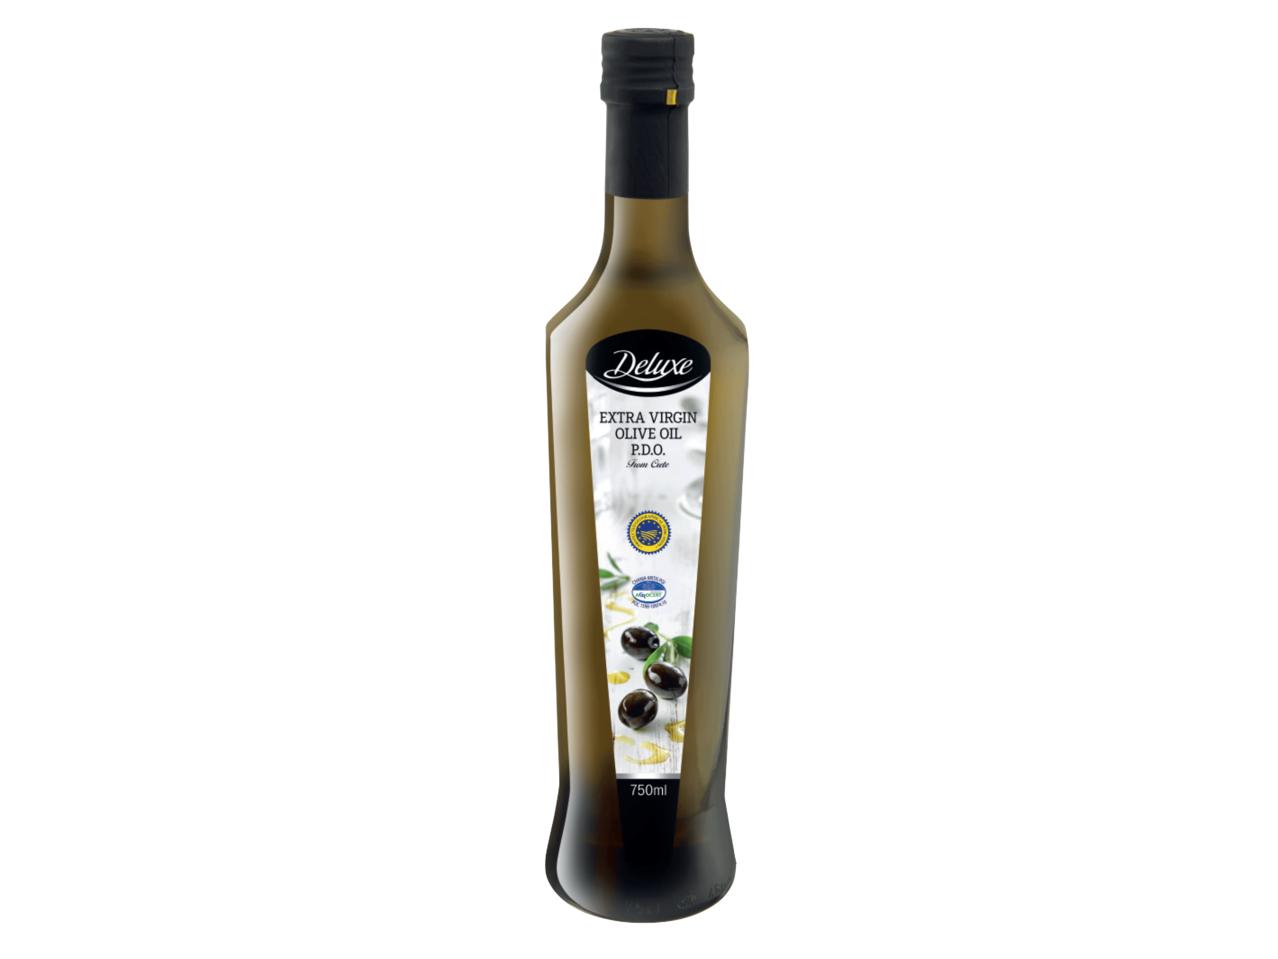 DELUXE Extra Virgin Olive Oil P.D.O